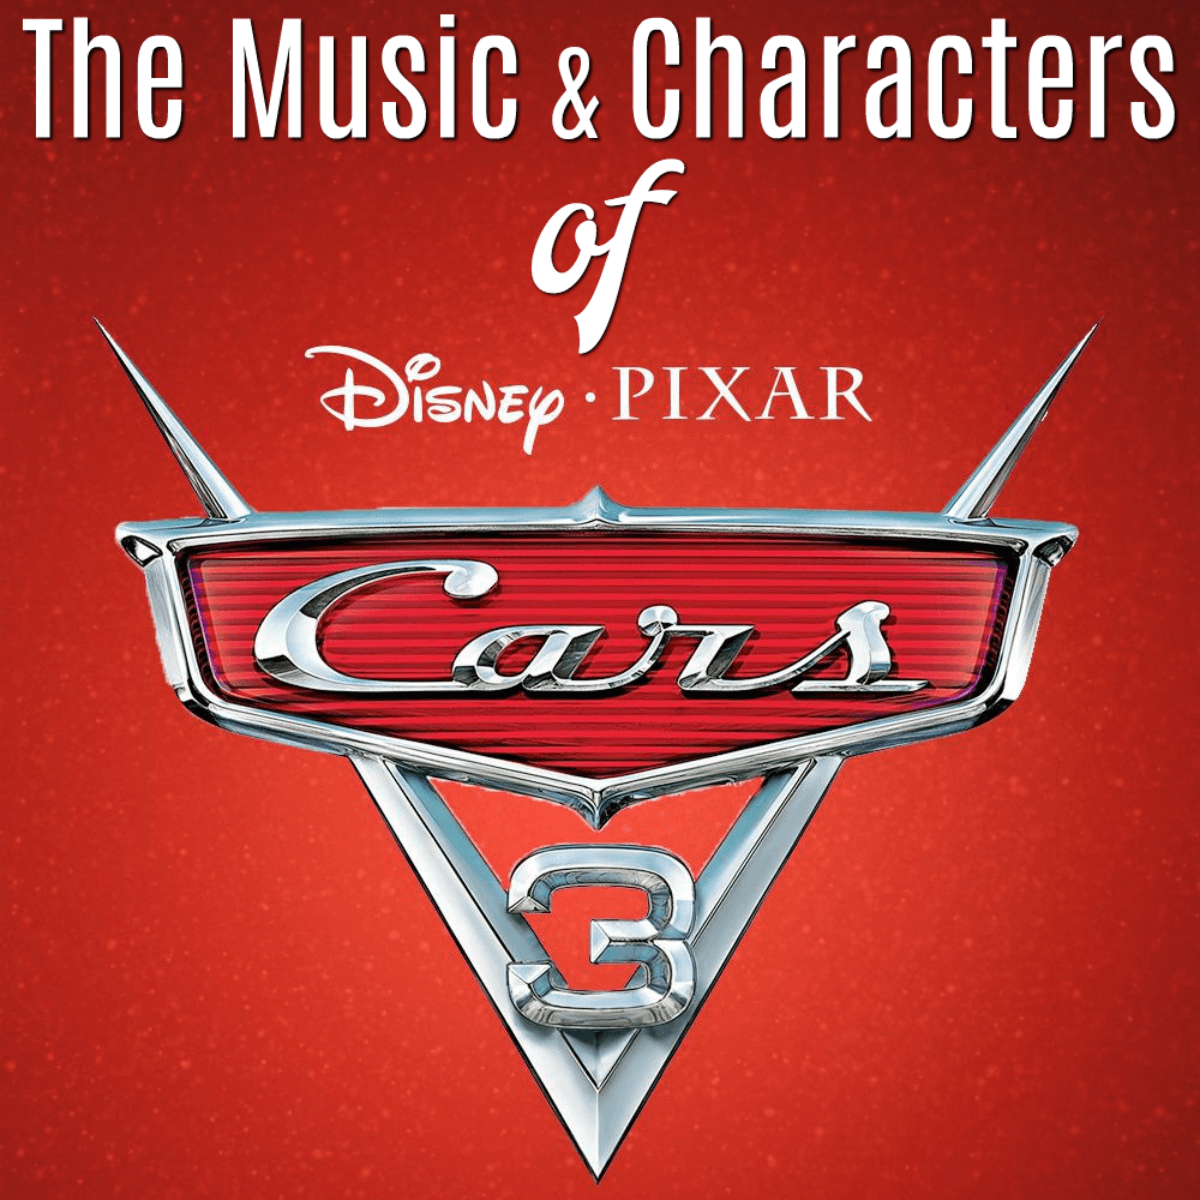 Cars Movie Logo - Cars 3: The Music and Characters that Make This the Best Cars Movie Yet!